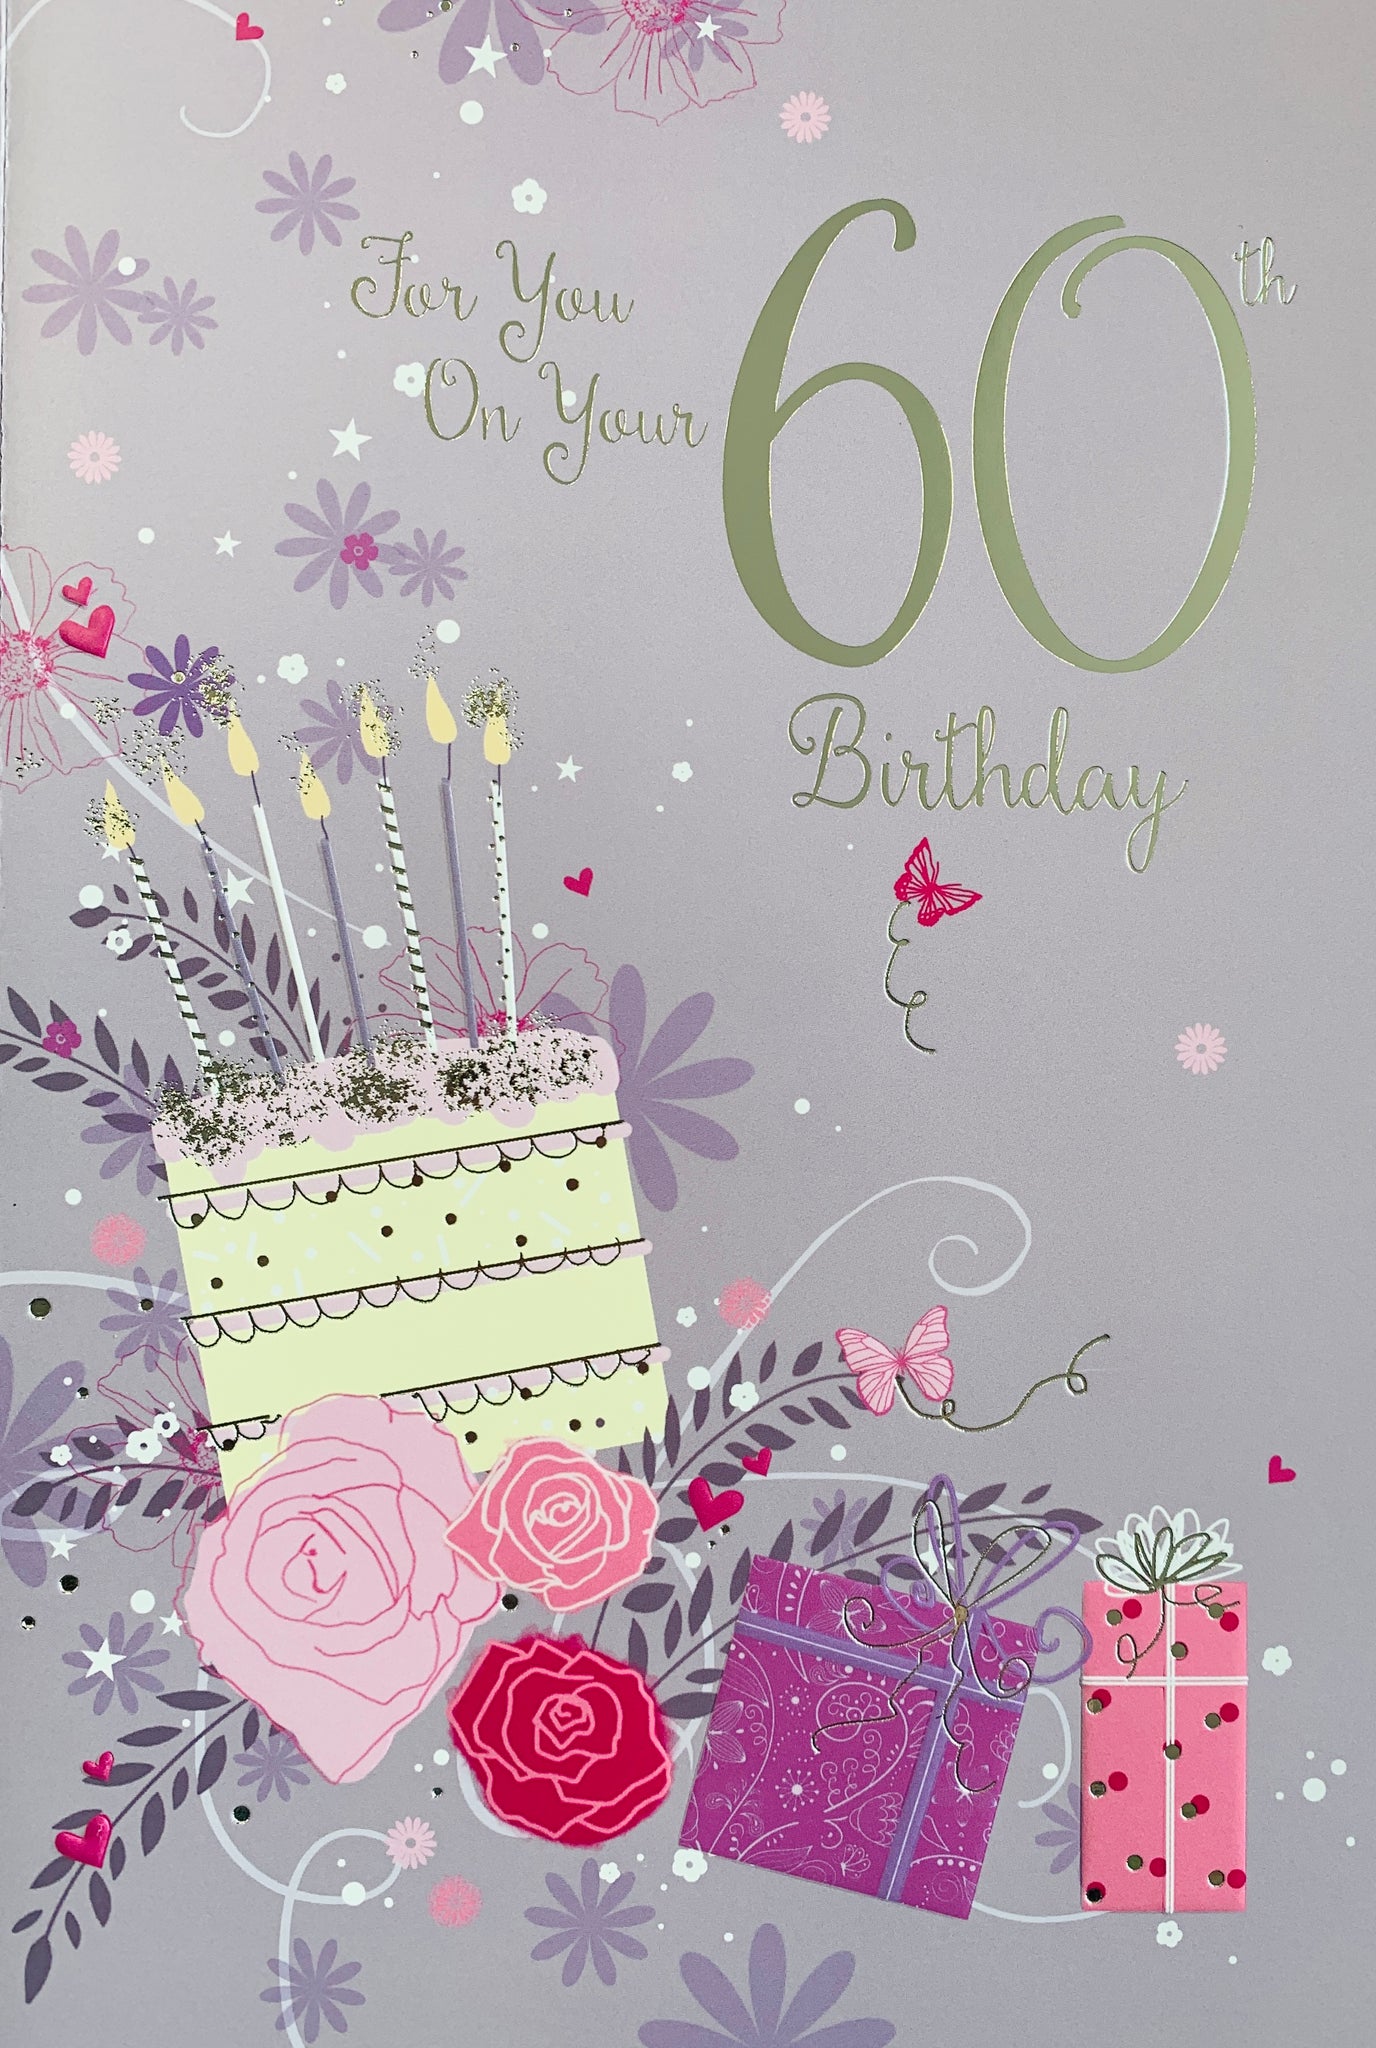 60th birthday card - cake and flowers